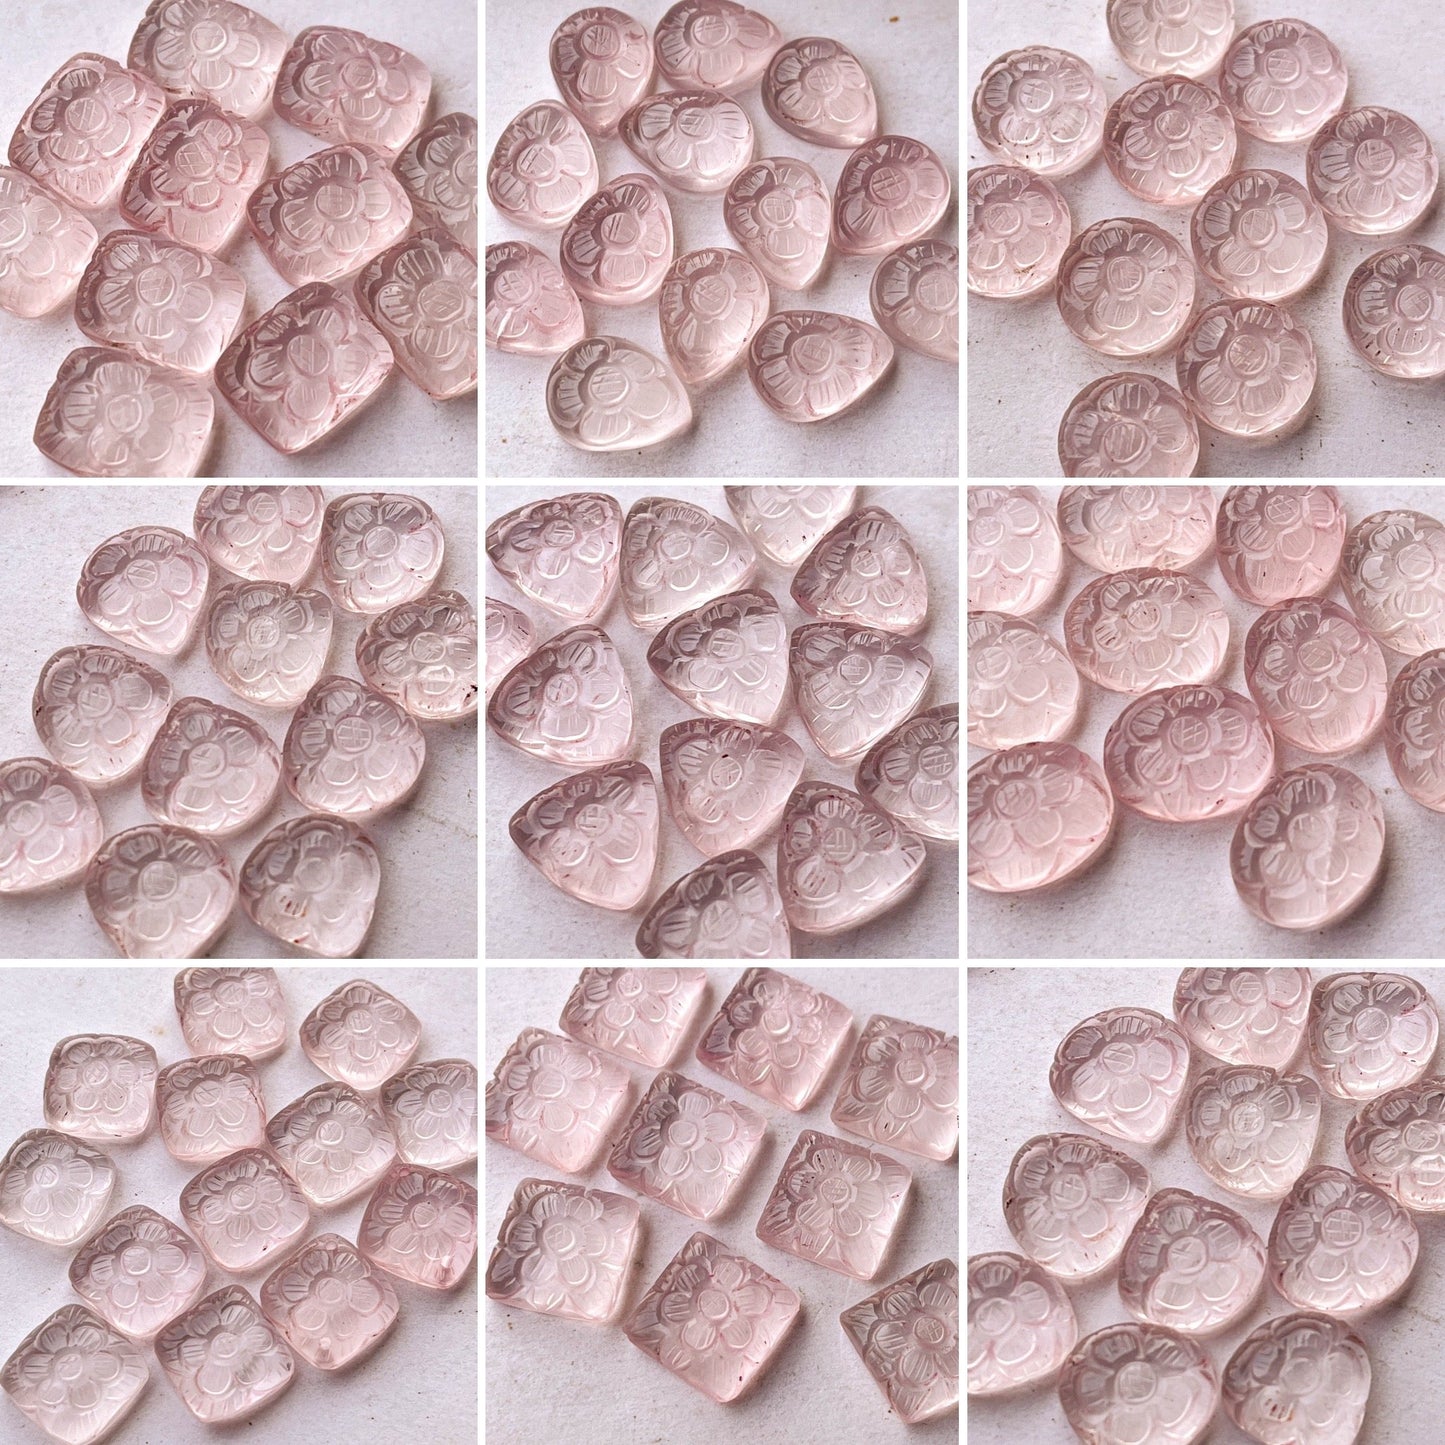 Natural Rose Quartz flower carved Mix shape Cabs Beadsforyourjewelry